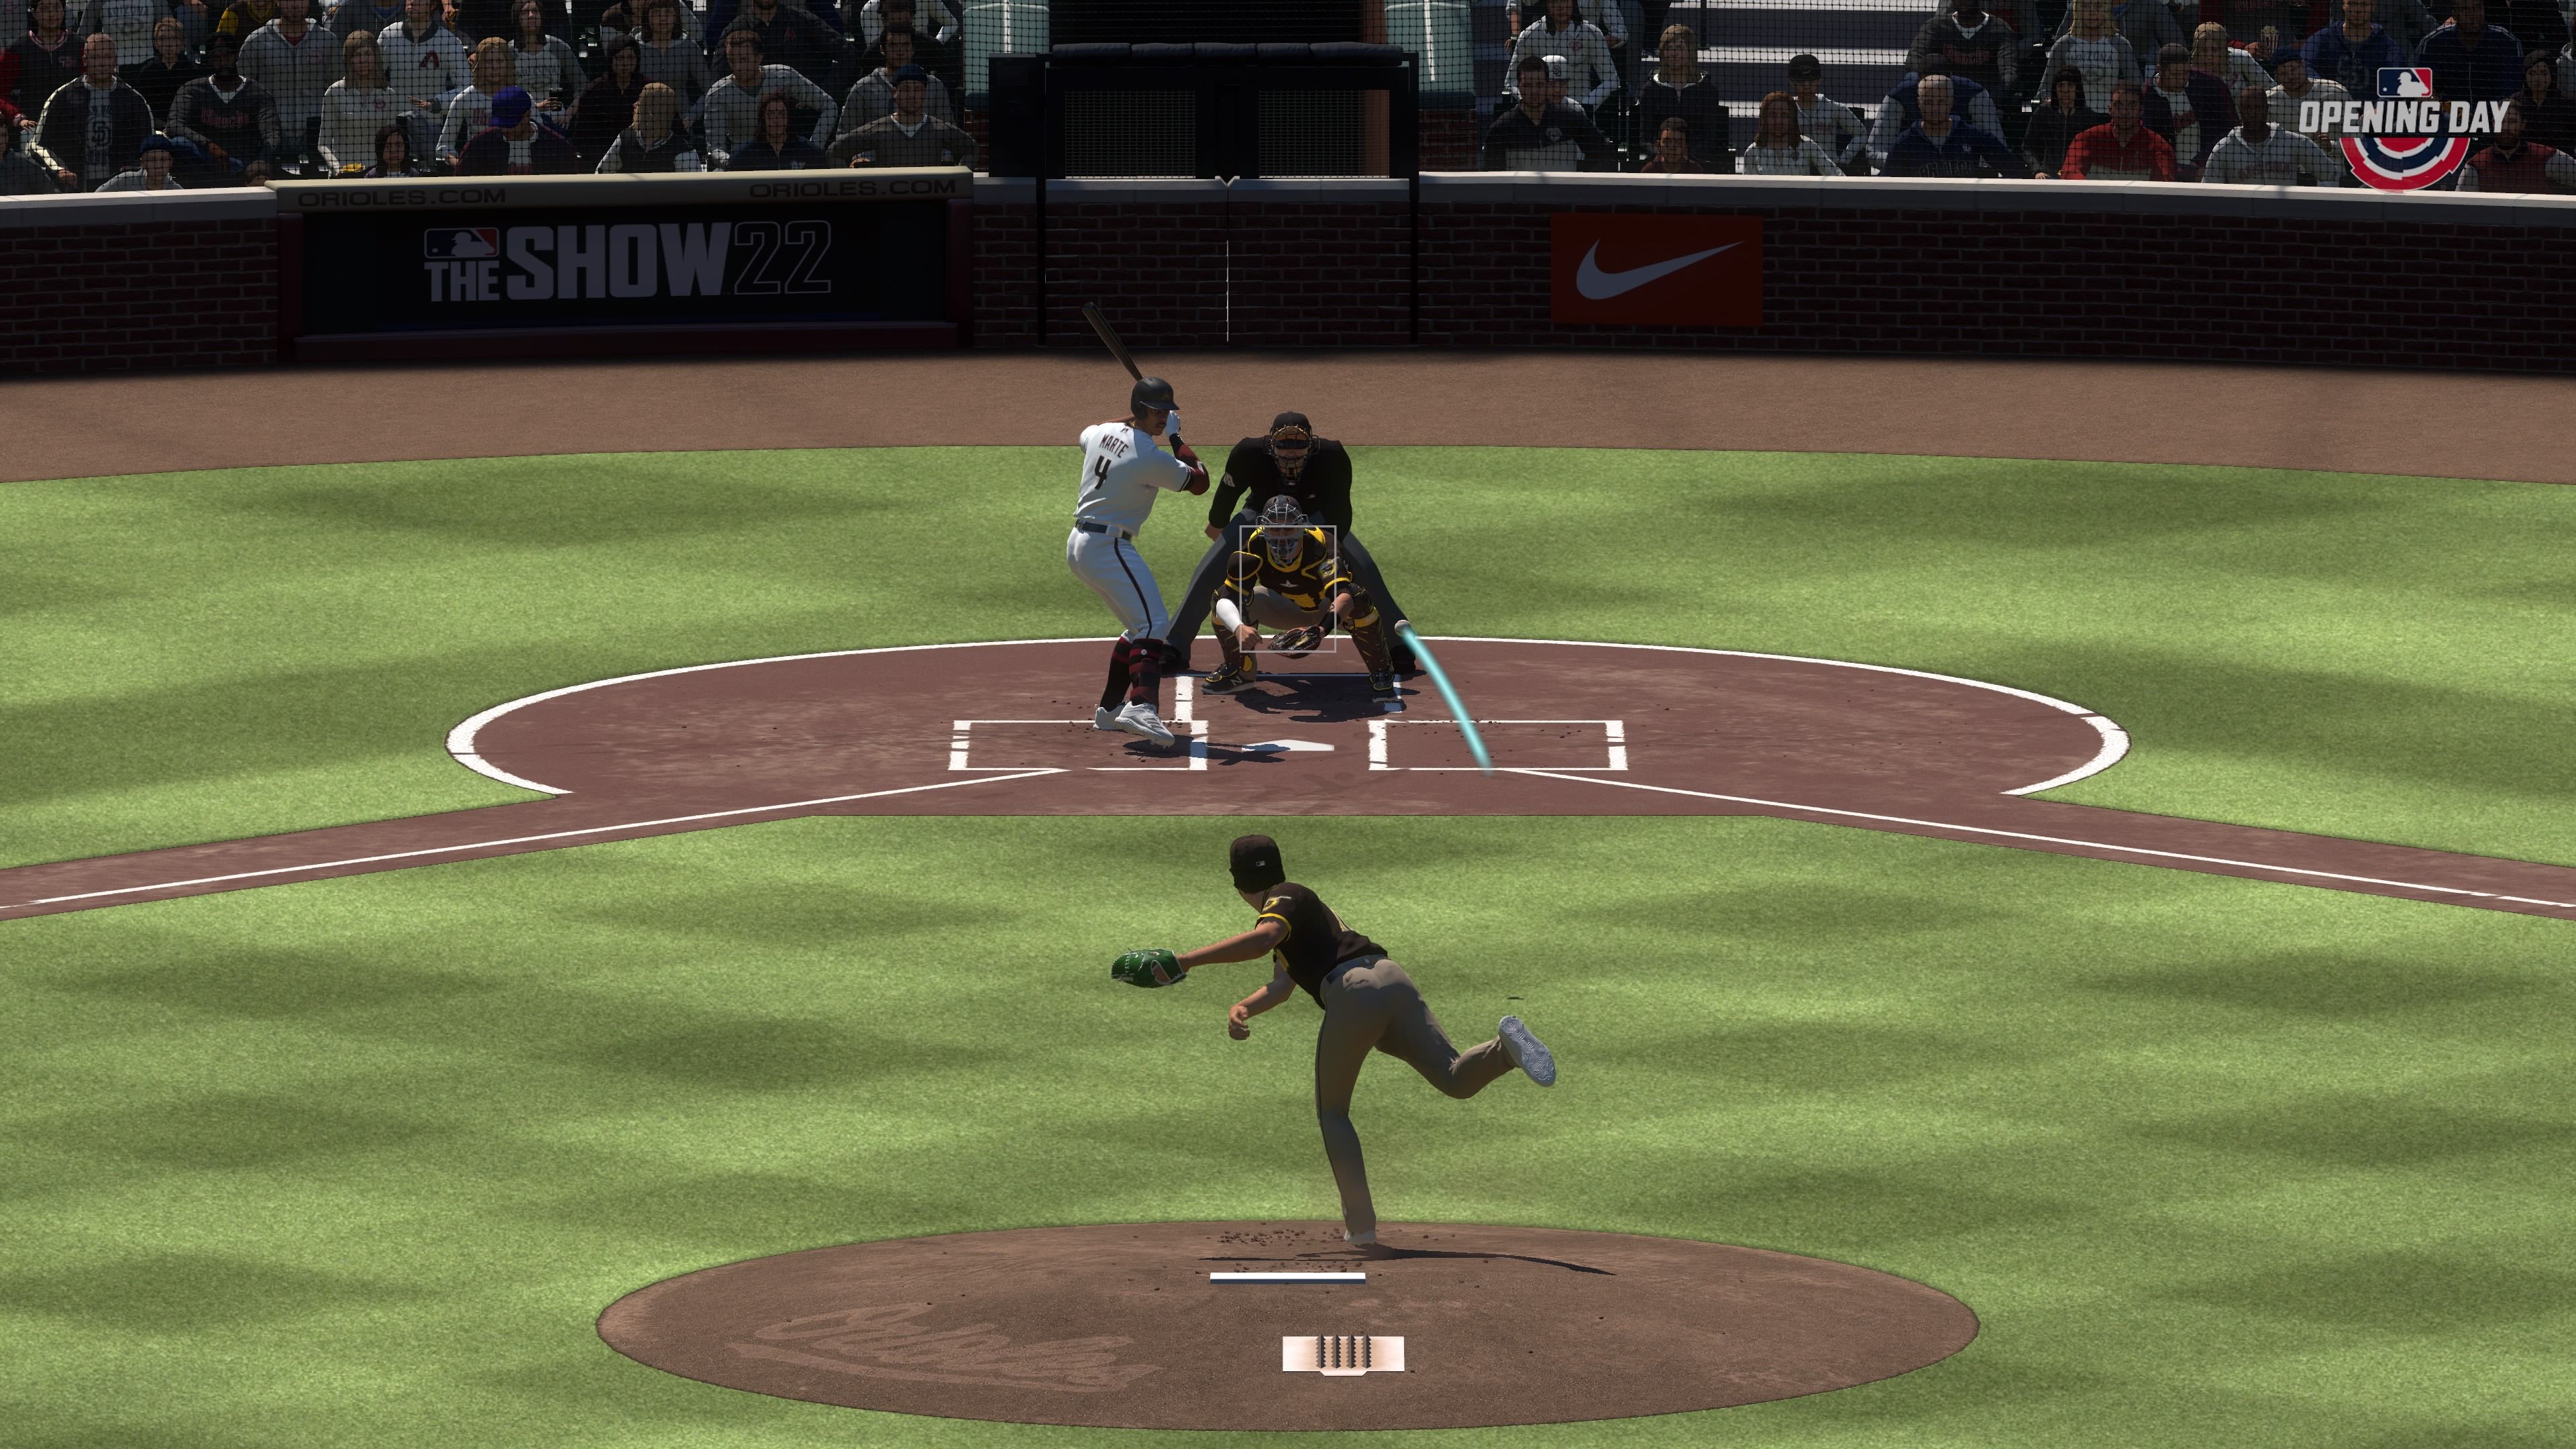 MLB The Show 22 (Playstation 5/ Xbox Series X) Reviewed. - The Technovore